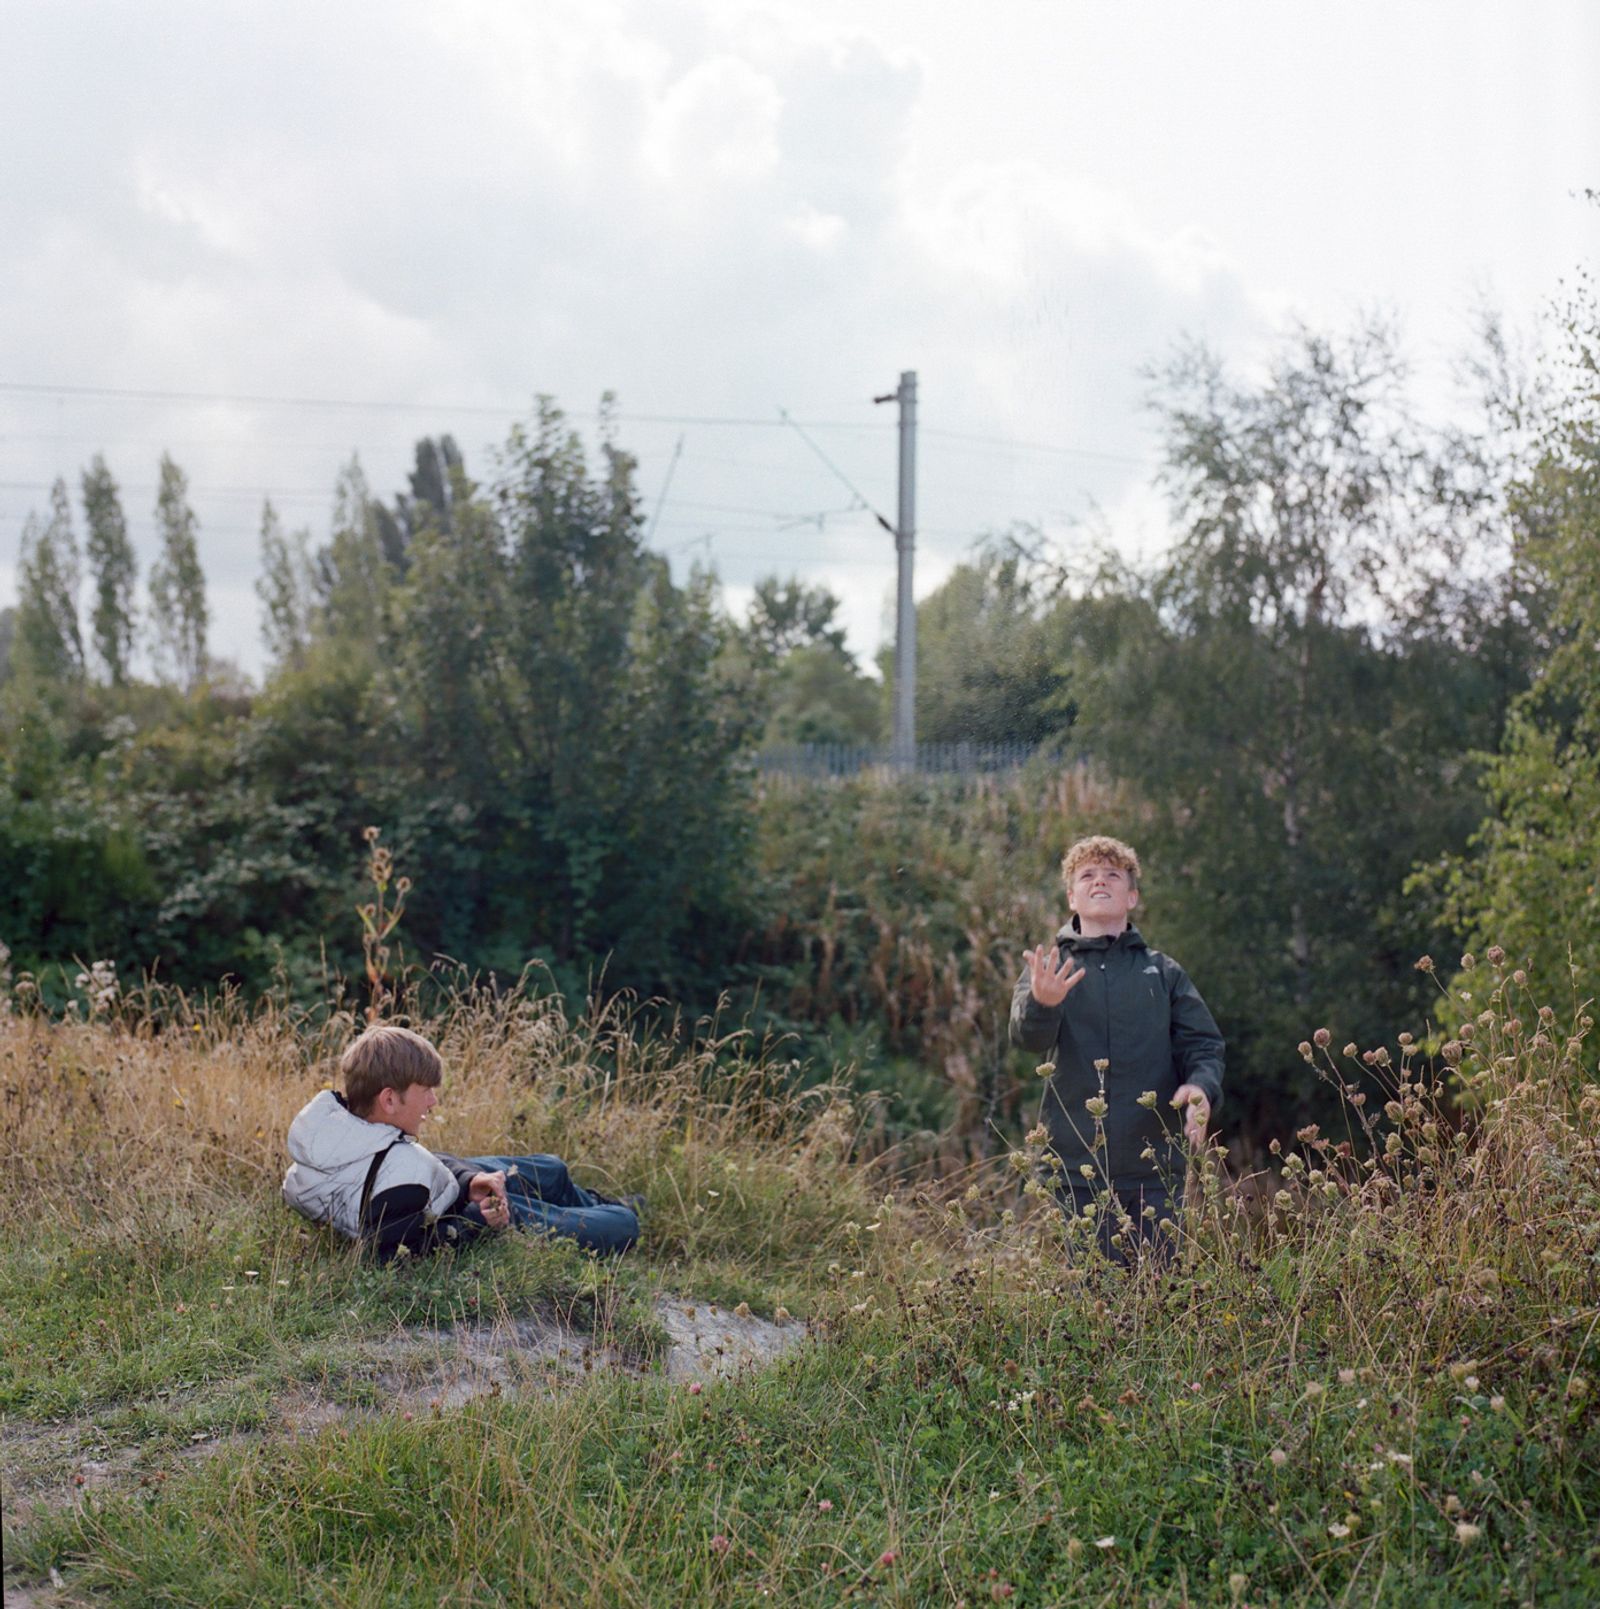 © Laura Pannack - Image from the The Cracker photography project